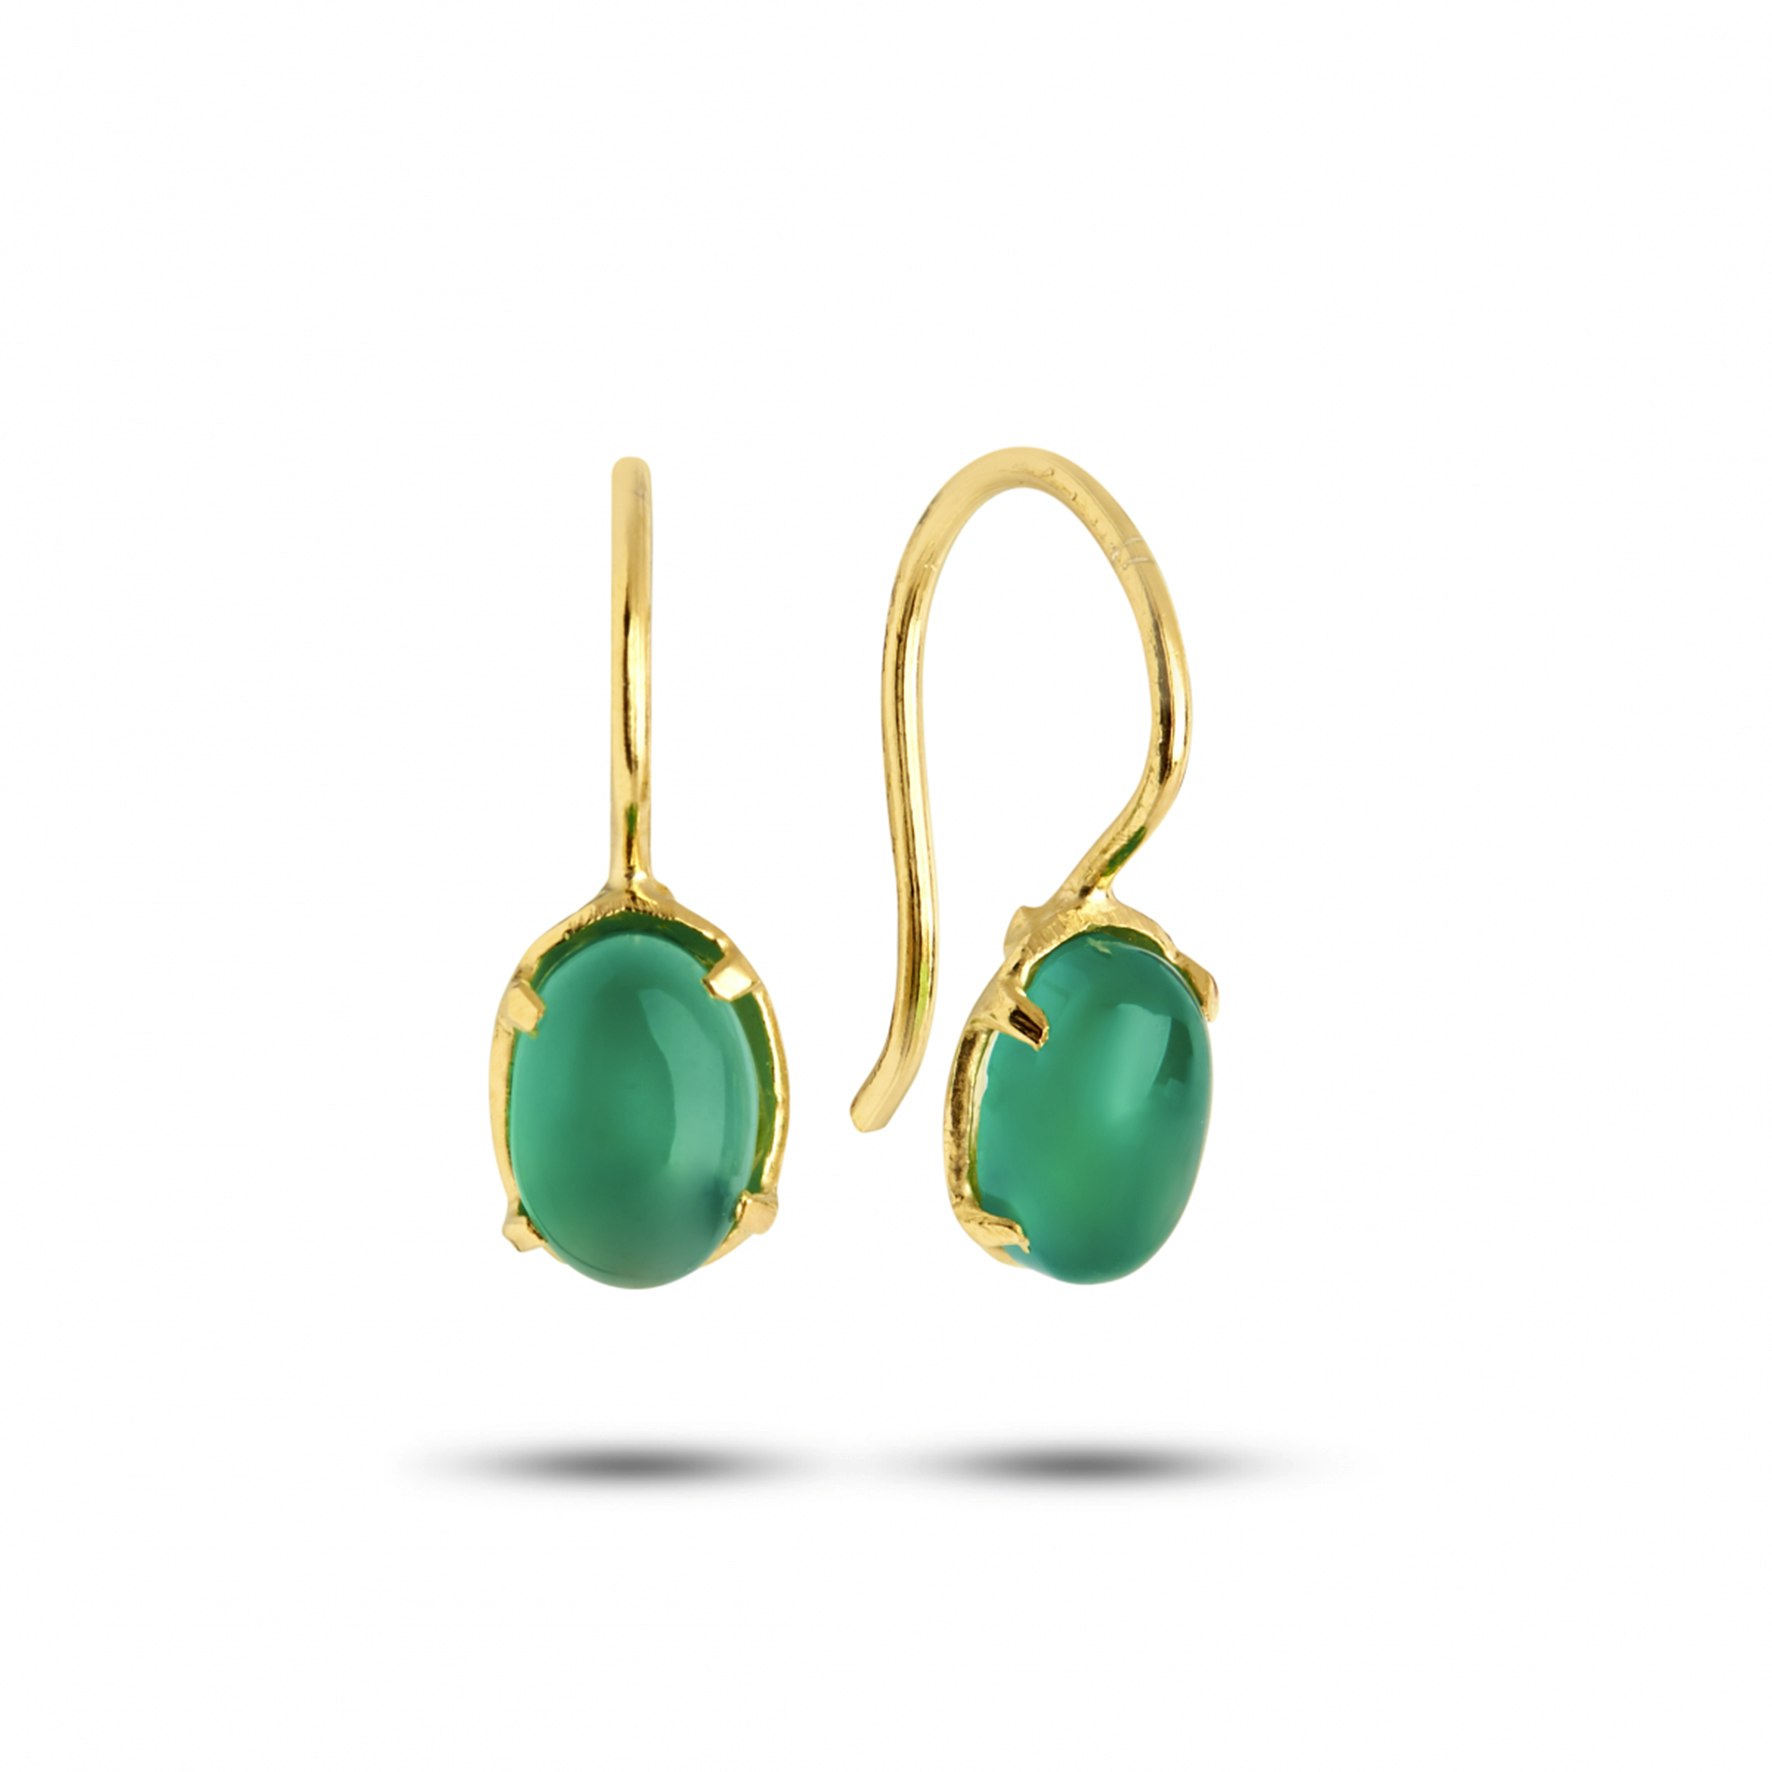 Gem Candy Earrings Confidence from Carré in Goldplated-Silver Sterling 925